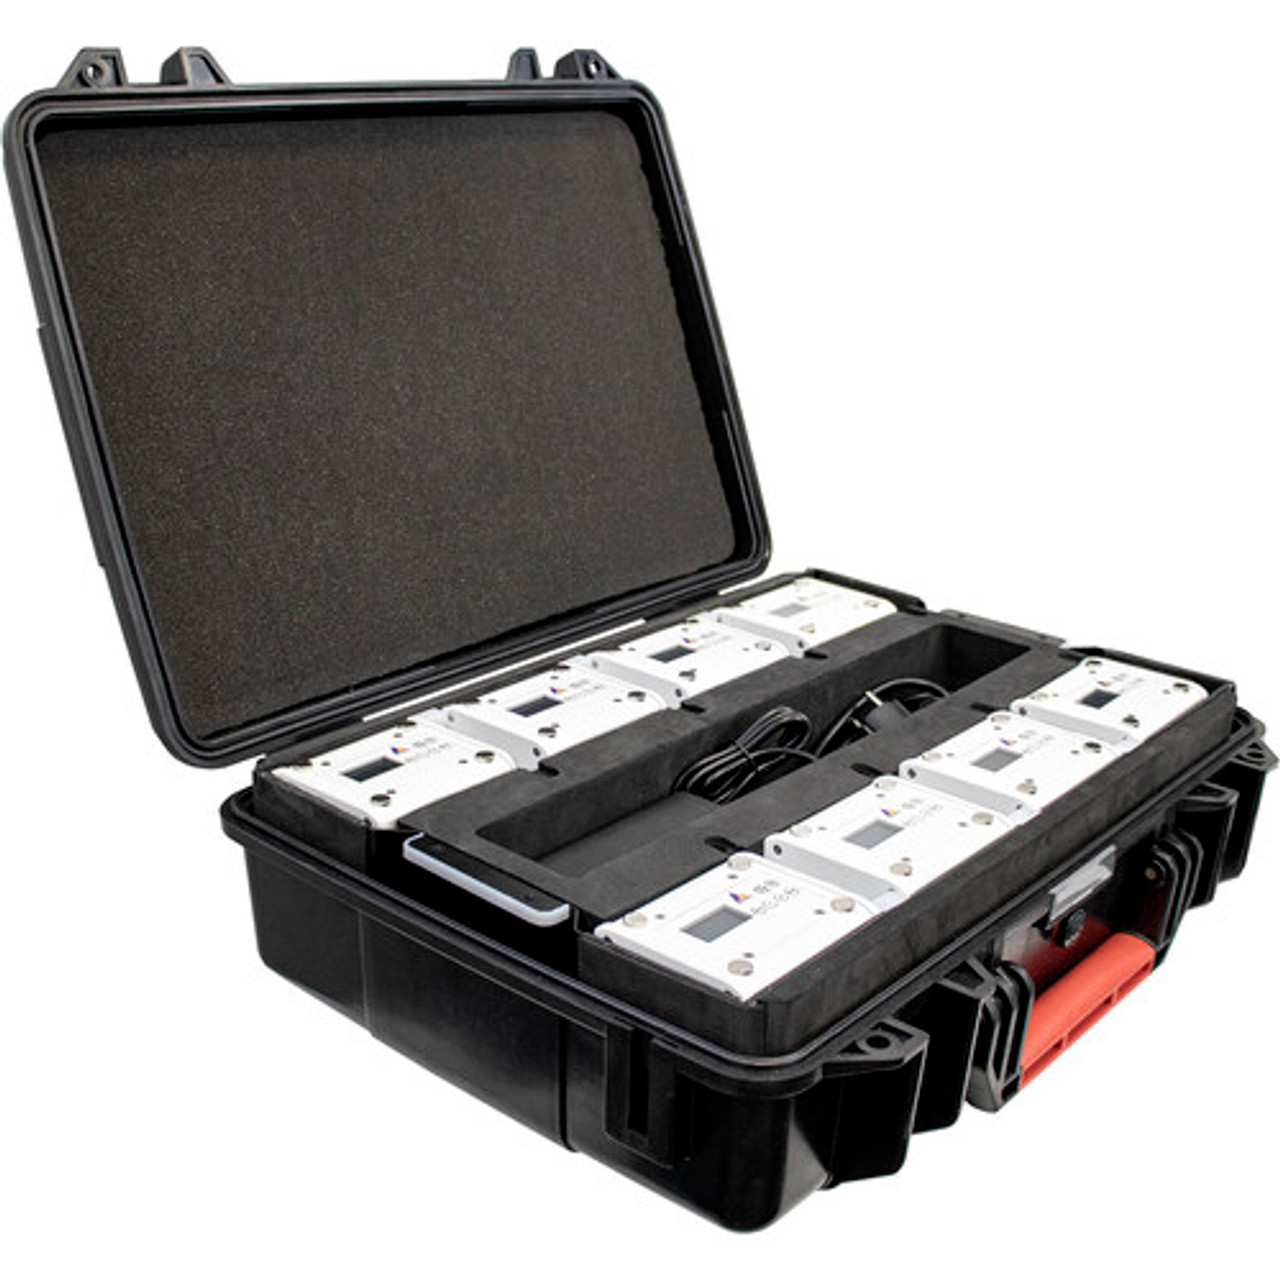 Astera FP5-PS SET 8 x PowerStation Set with Case and Accessories (FP5-PS SET-US *KIT*)